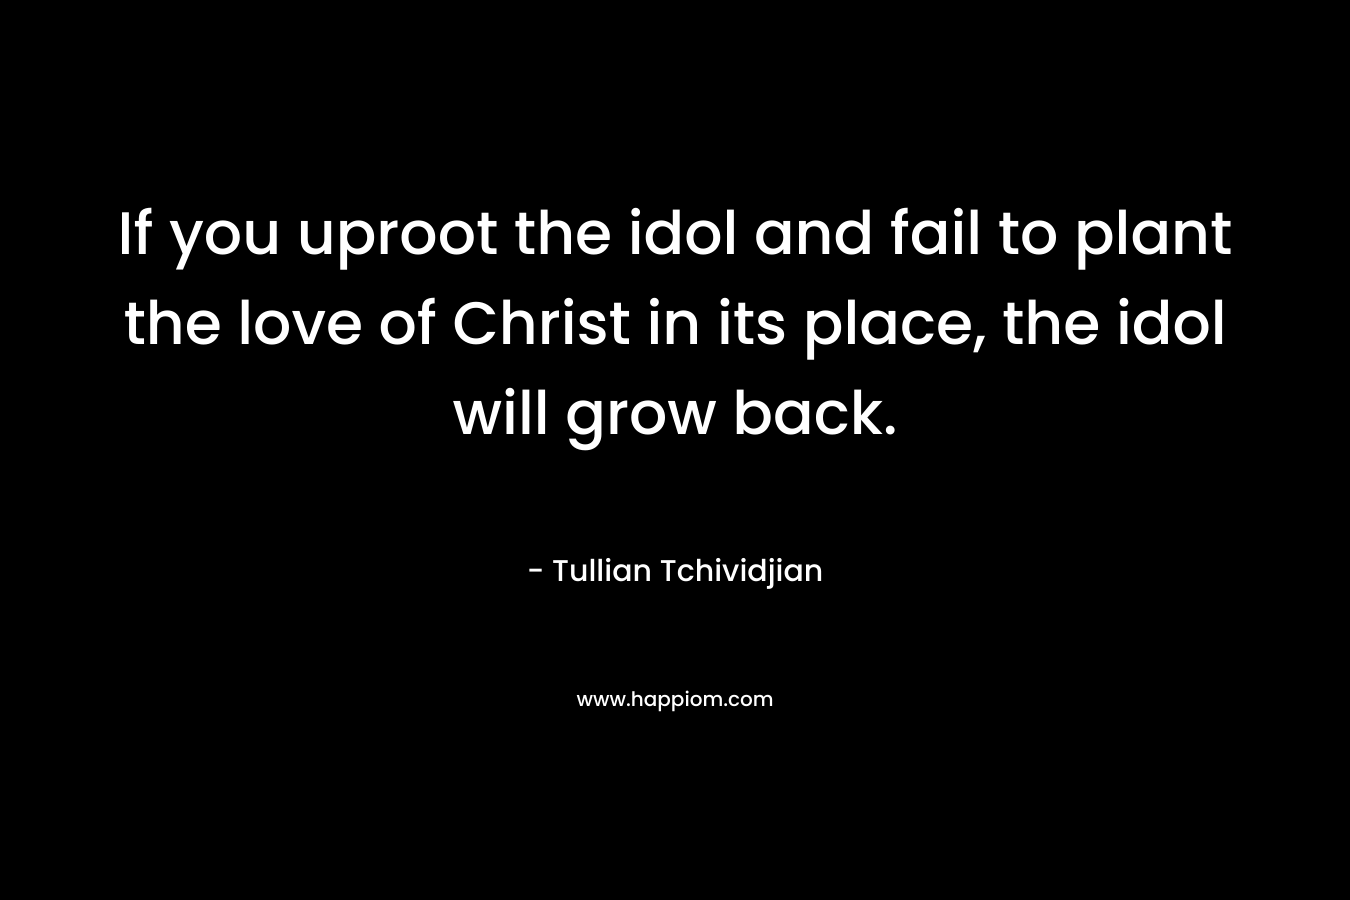 If you uproot the idol and fail to plant the love of Christ in its place, the idol will grow back. – Tullian Tchividjian